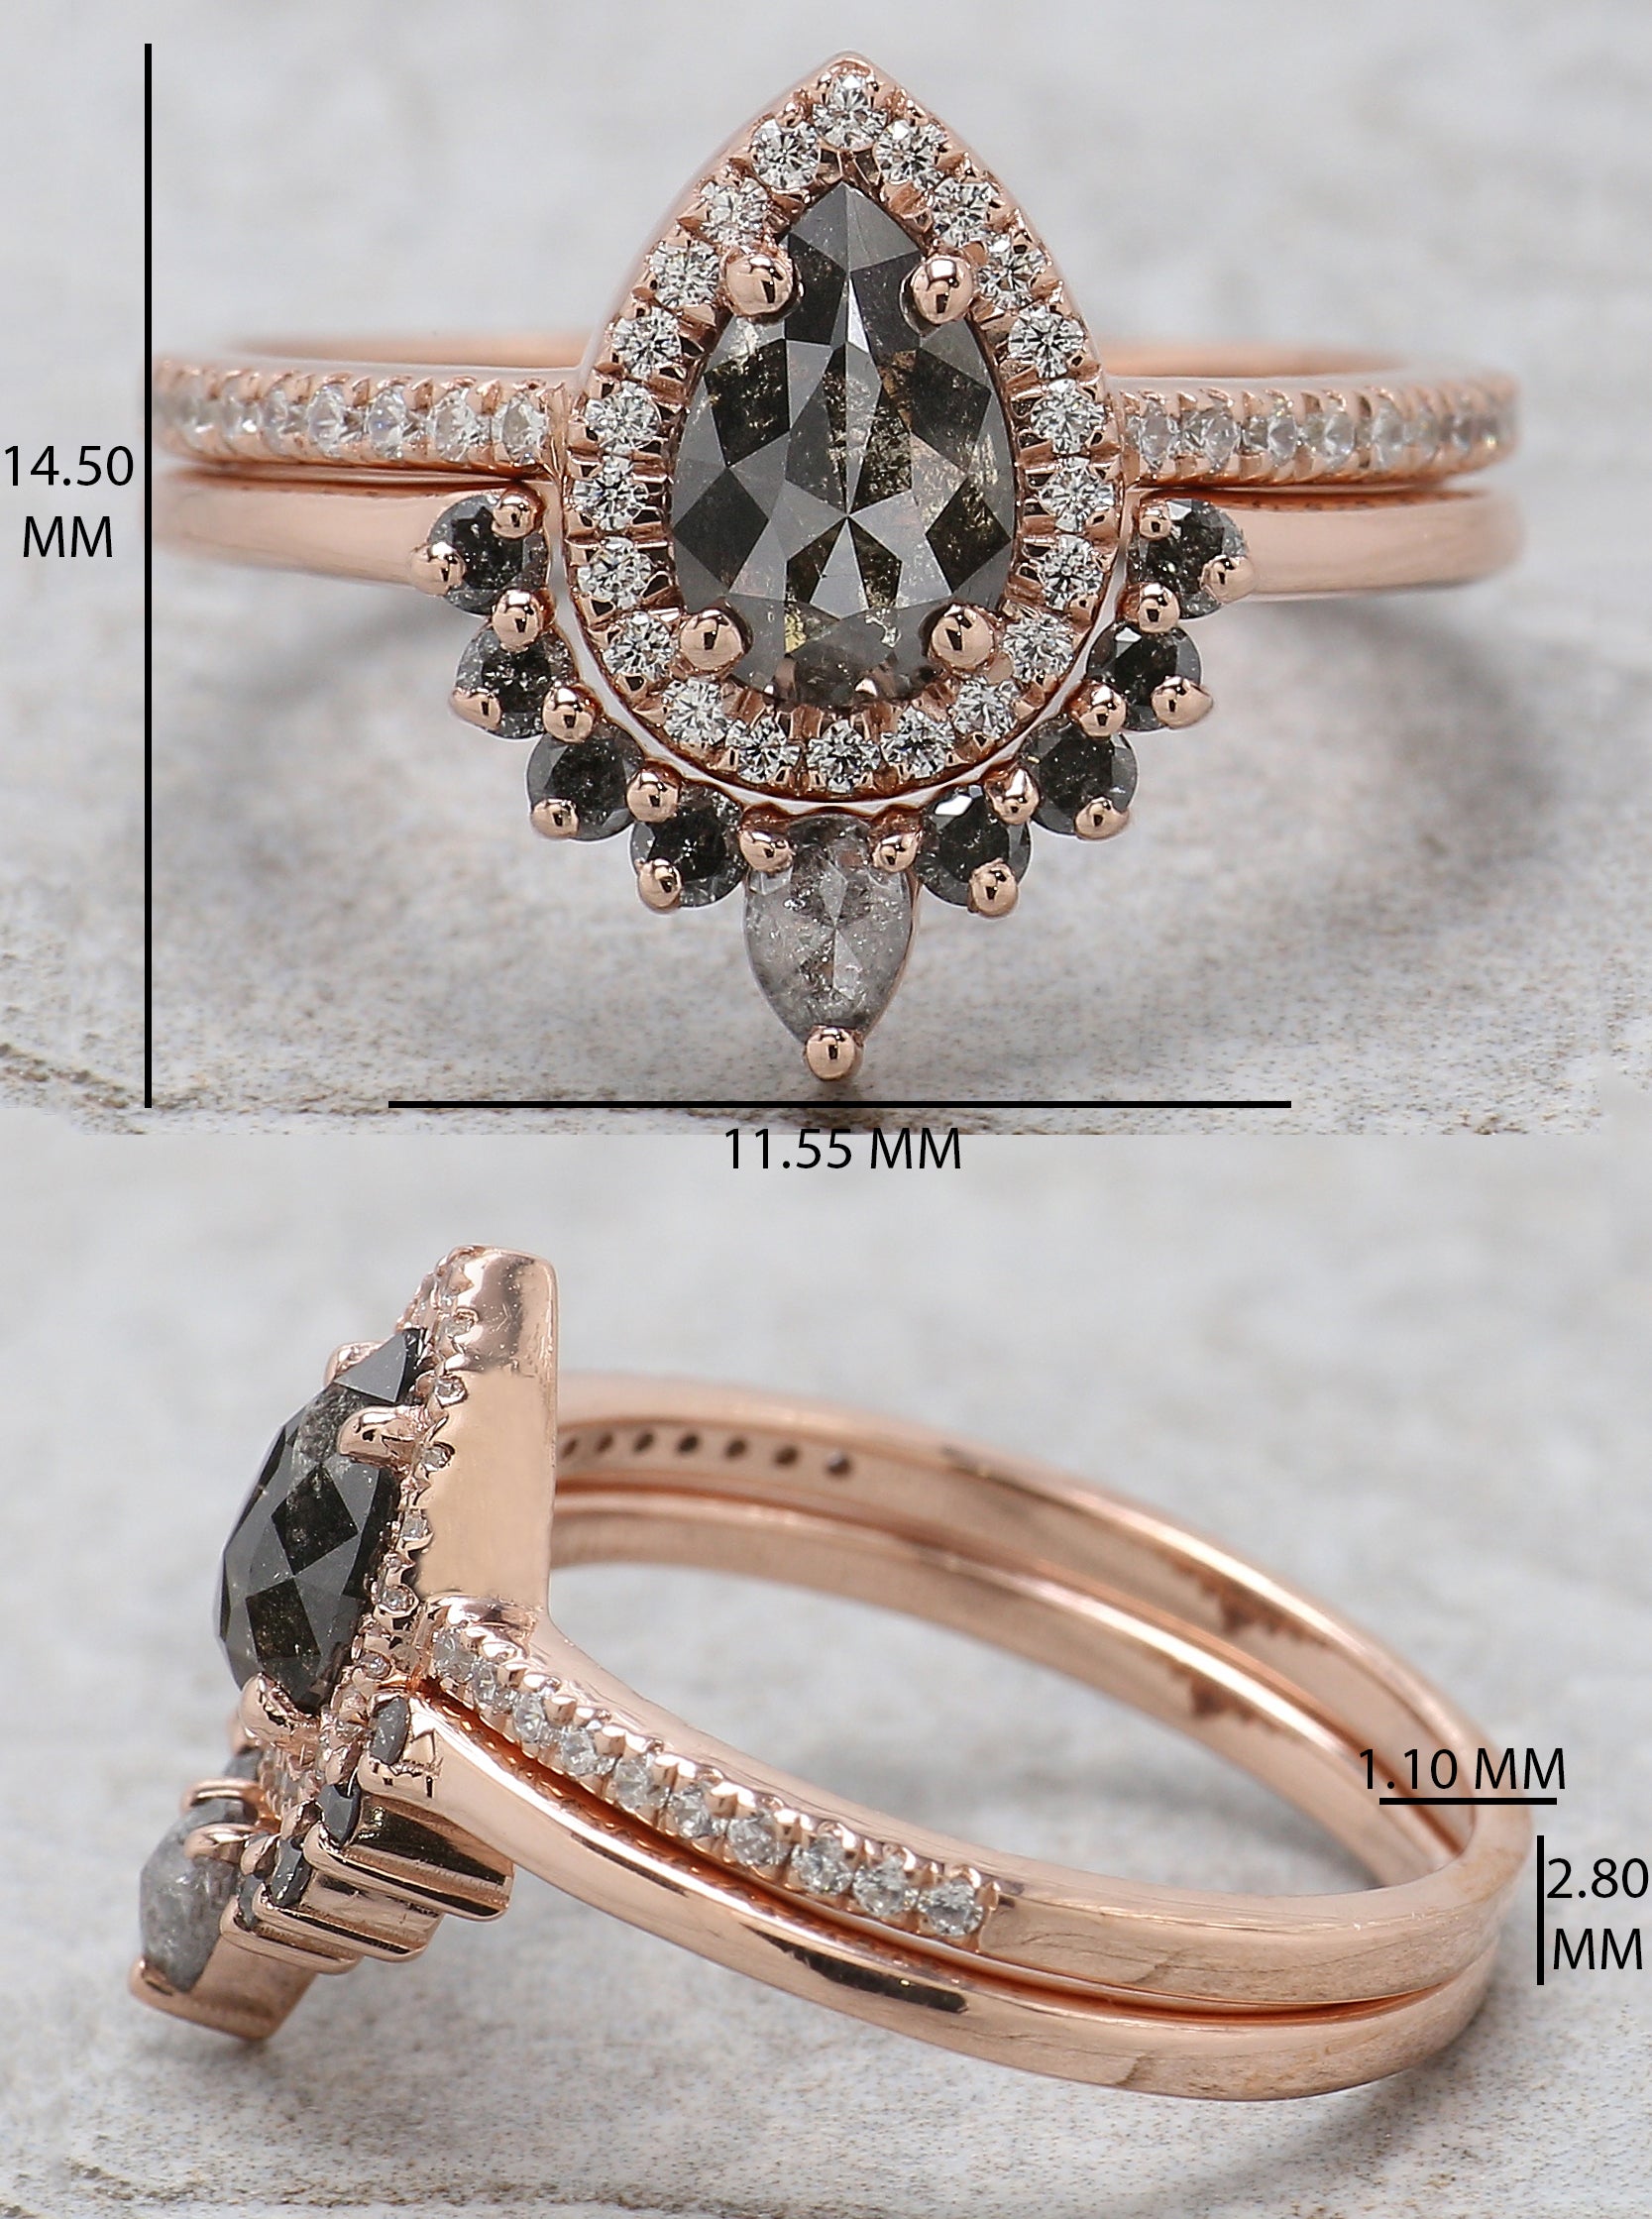 Pear Cut Salt And Pepper Diamond Ring 0.73 Ct 7.10 MM Pear Shape Diamond Ring 14K Solid Rose Gold Silver Engagement Ring Gift For Her QL1025